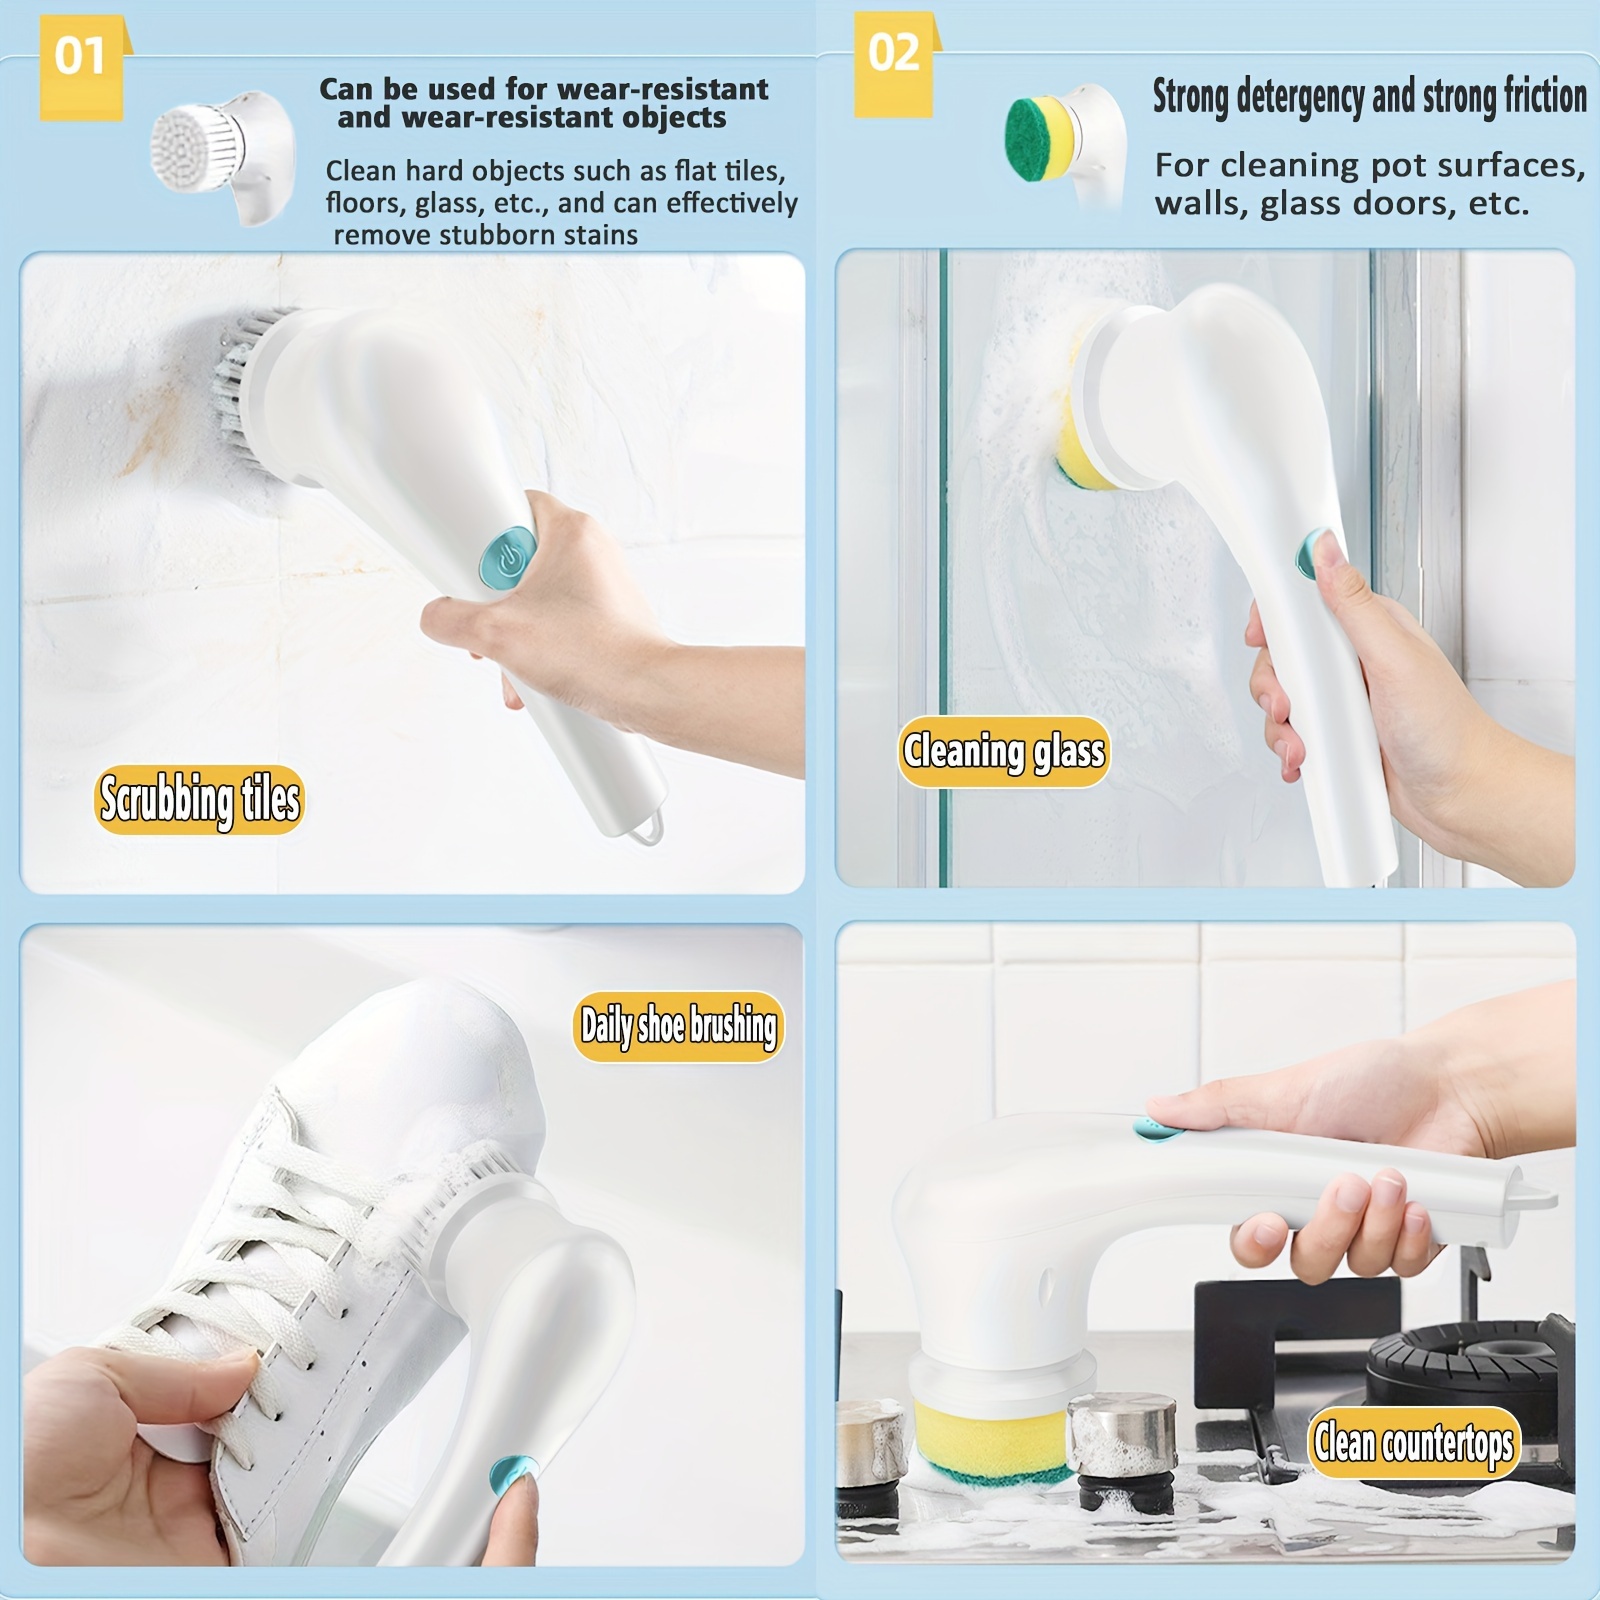 5-in-1 Electric Cleaning Brush Kit - Ideal for Tackling Kitchen and Ba –  dayiifay